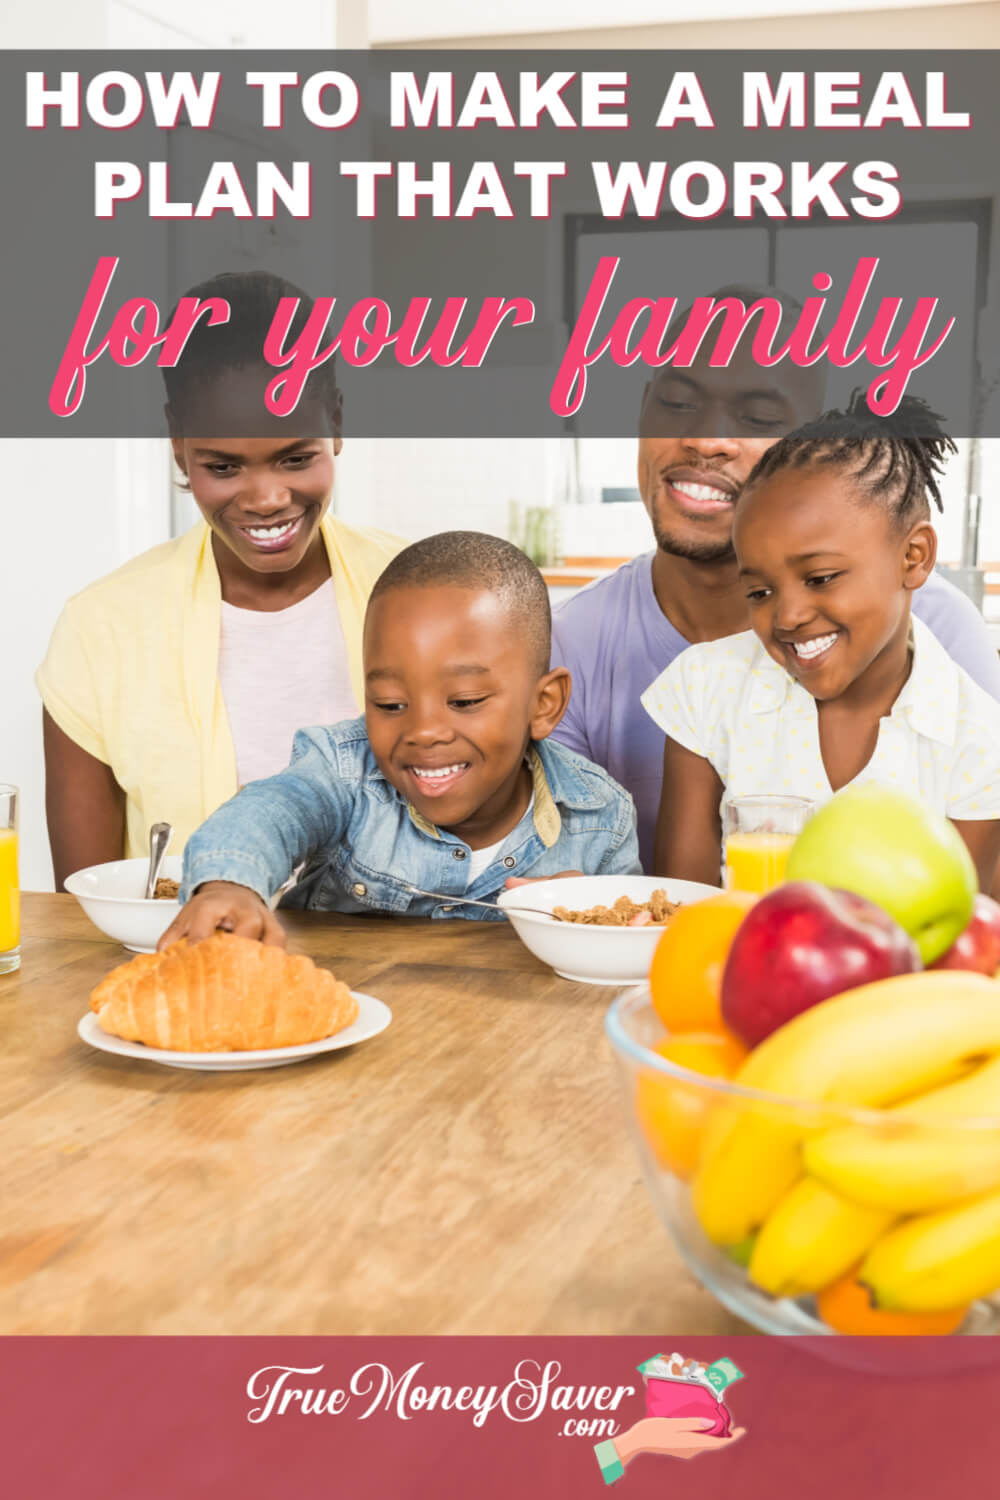 How To Make A Meal Plan That Works For Your Family